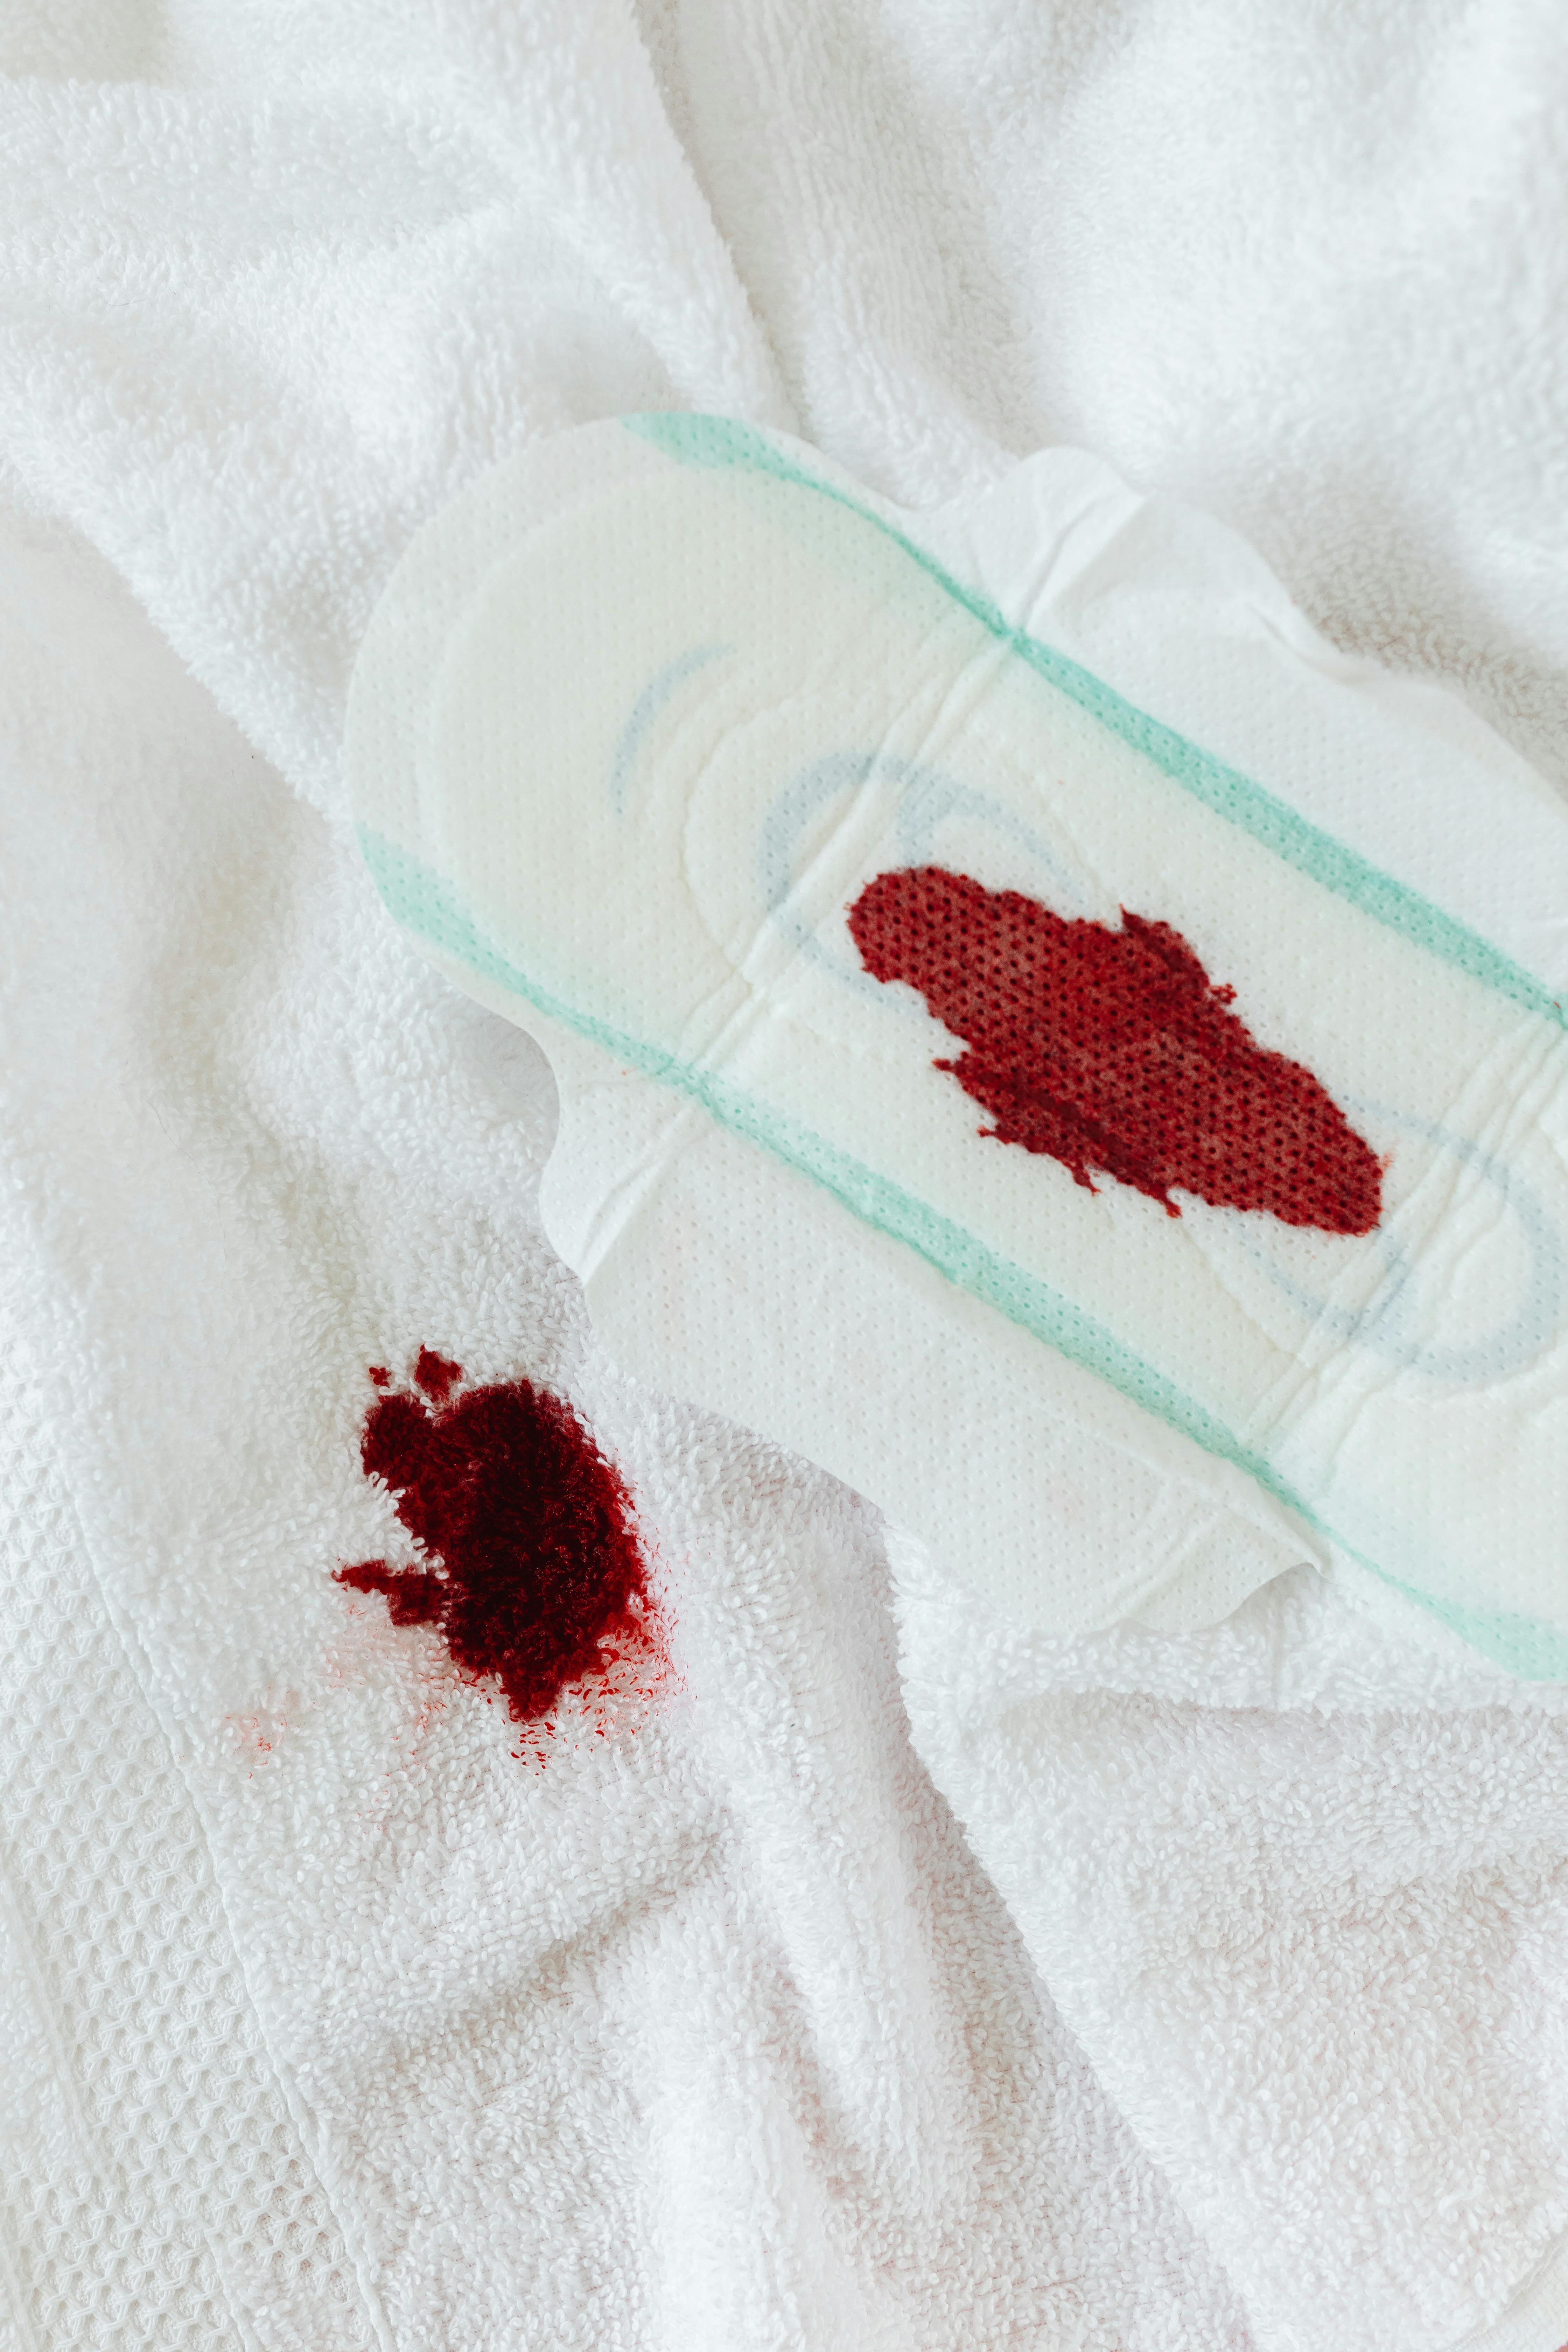 A Menstrual Stain on a Pad and Towel · Free Stock Photo